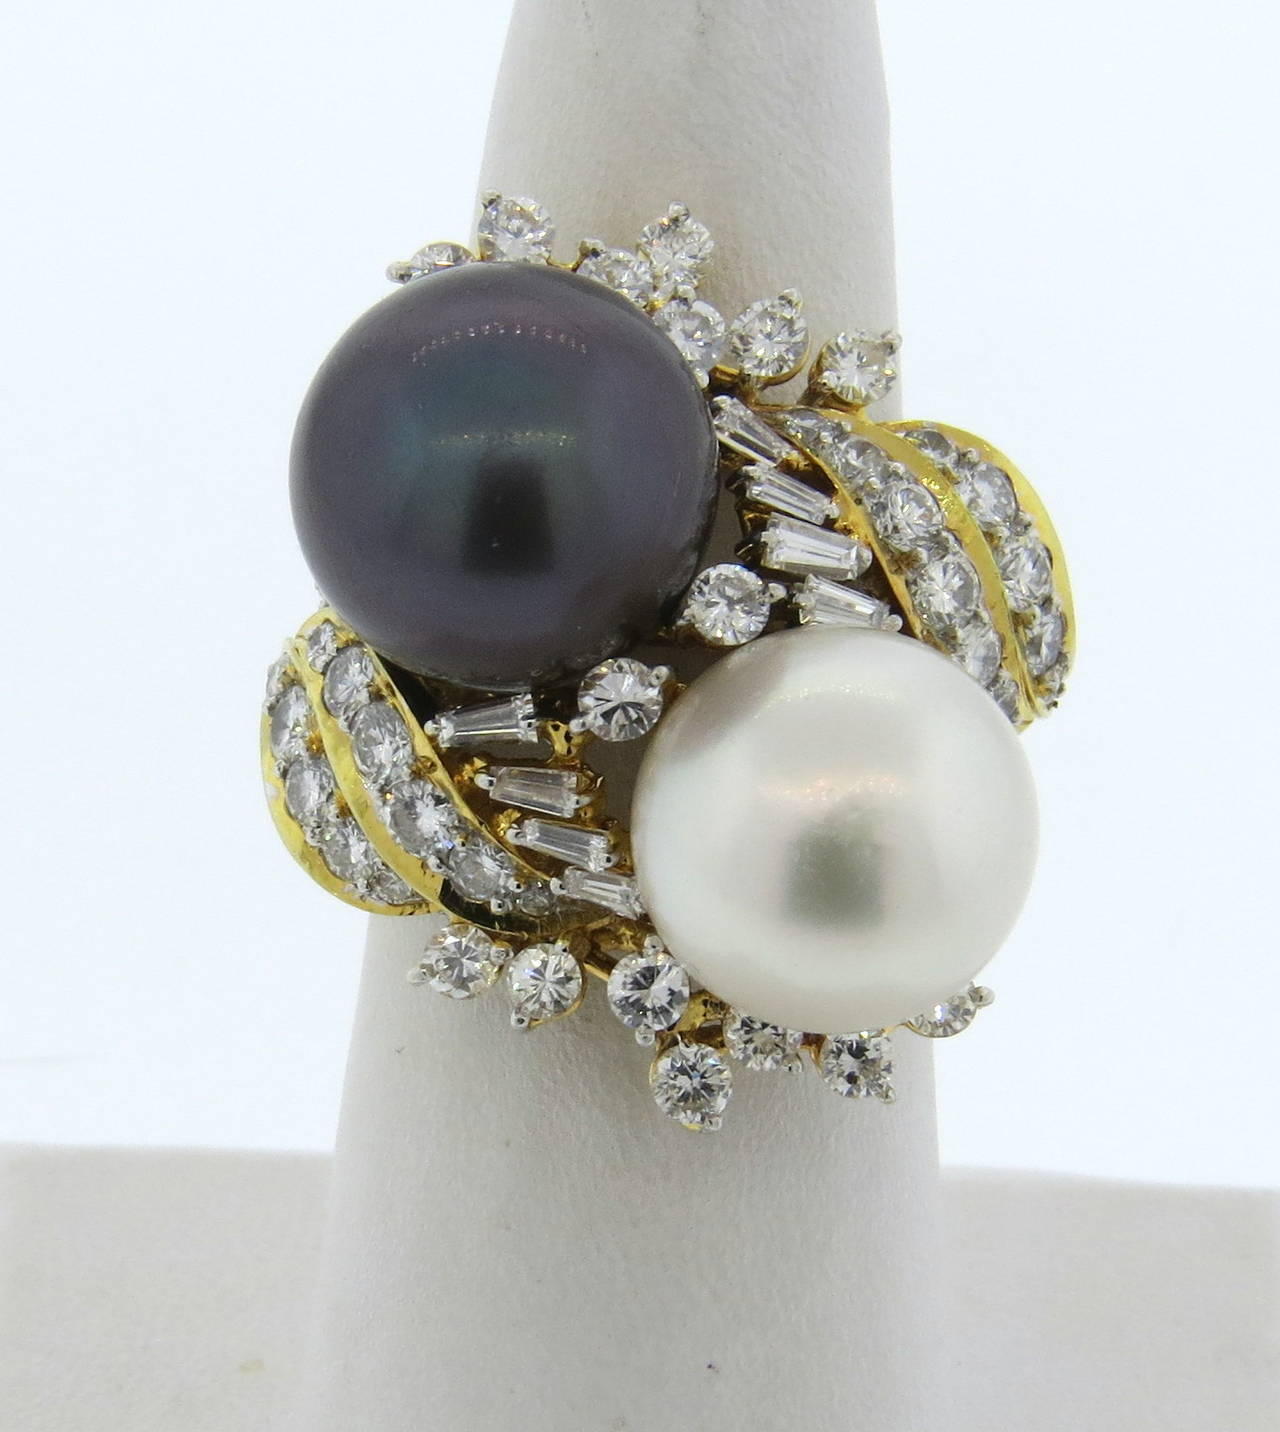 Gucci 18k gold cocktail ring with two South Sea pearls, measuring 12.6mm and 13.3mm in diameter, surrounded with approx. 2.20 ctw diamonds. Ring size 6 1/2, ring top is 31mm x 27mm, ring sits approx. 21mm from the finger. Marked Gucci,750,18k.